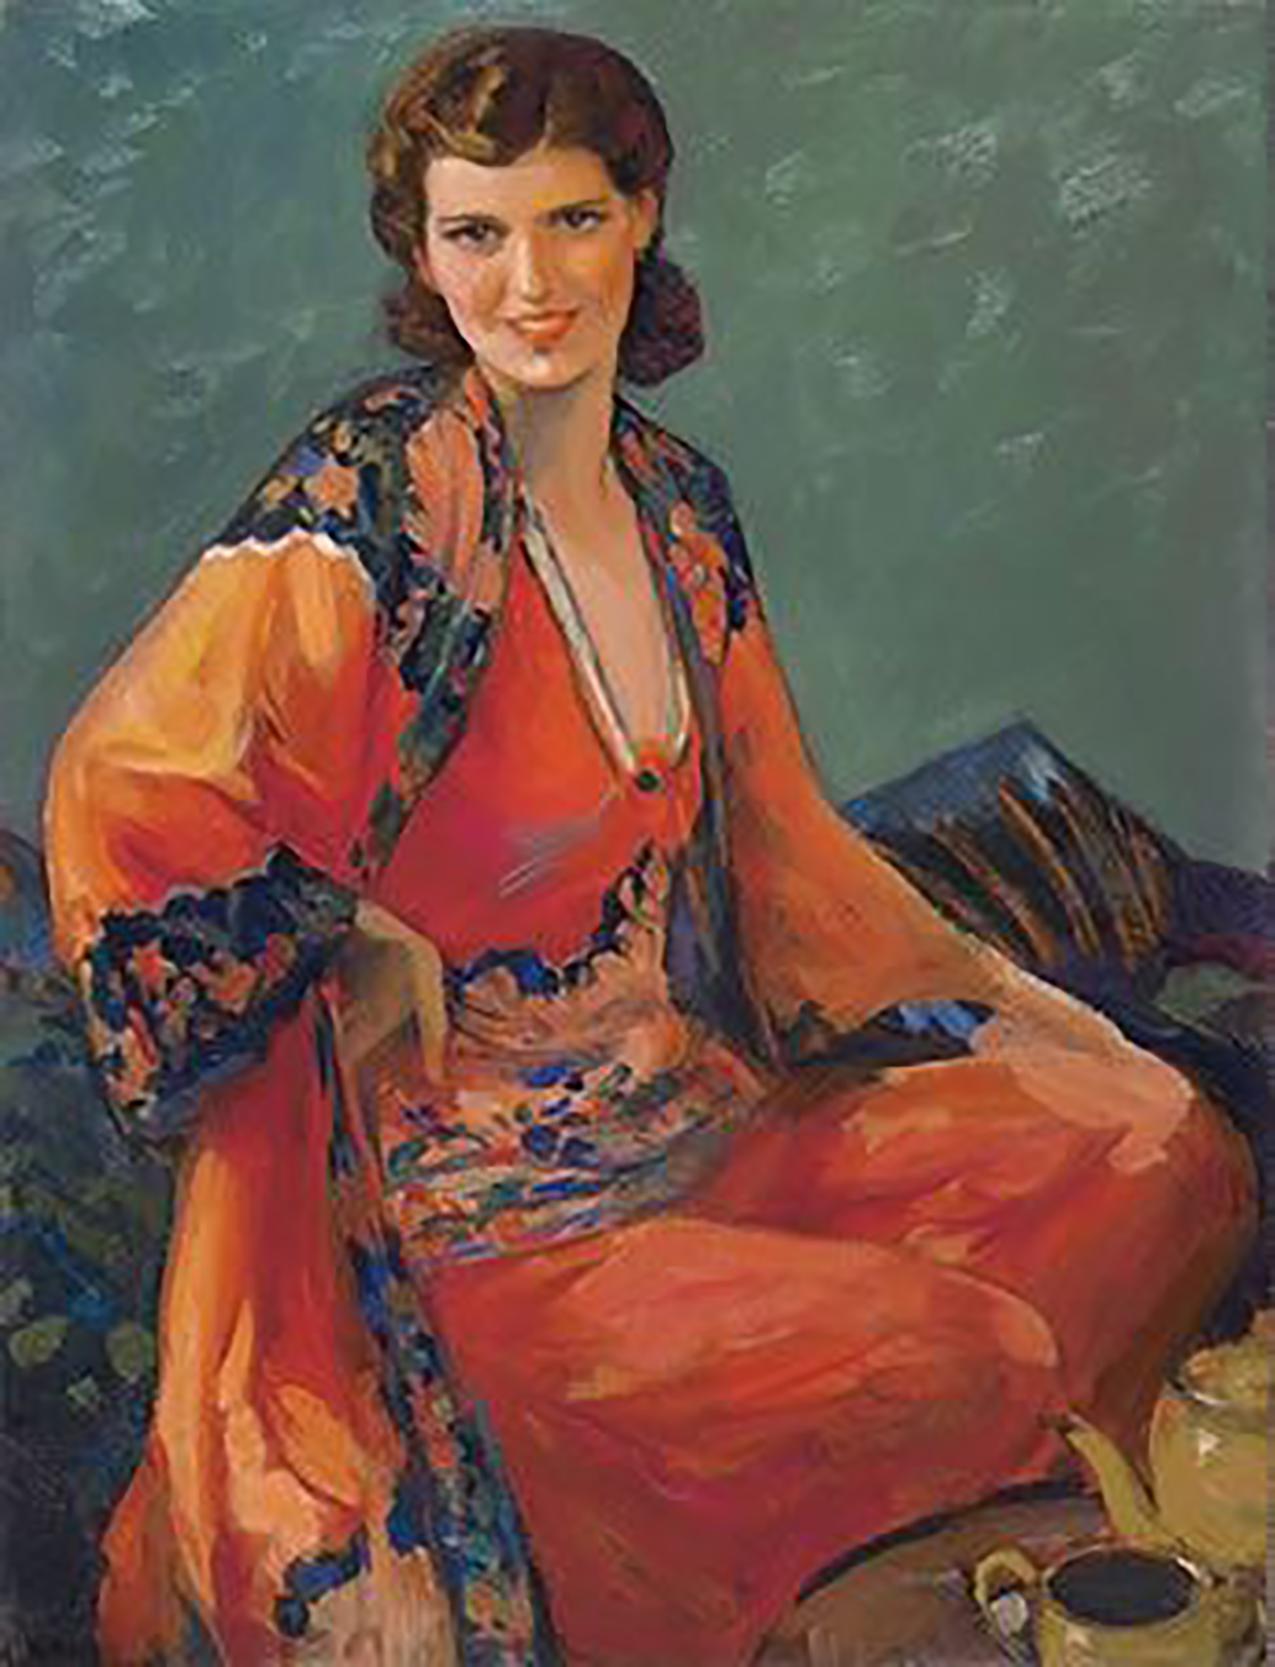 Walter G. Ratterman Figurative Painting - Woman Seated, Likely Magazine Cover